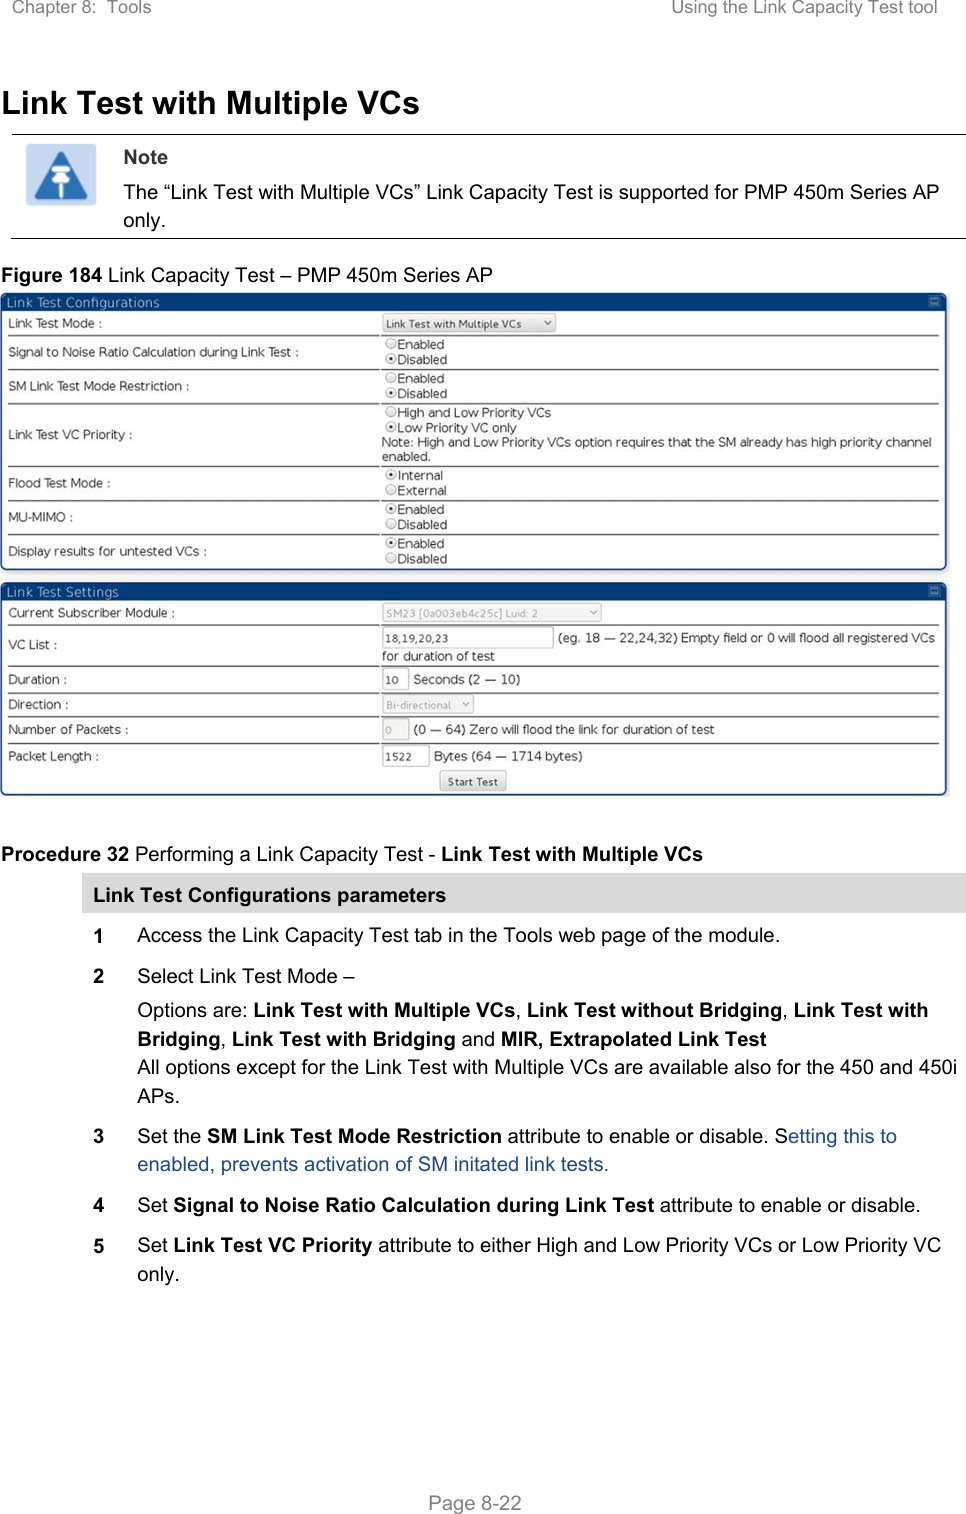 Chapter 8:  Tools  Using the Link Capacity Test tool   Page 8-22 Link Test with Multiple VCs  Note The “Link Test with Multiple VCs” Link Capacity Test is supported for PMP 450m Series AP only. Figure 184 Link Capacity Test – PMP 450m Series AP   Procedure 32 Performing a Link Capacity Test - Link Test with Multiple VCs Link Test Configurations parameters 1 Access the Link Capacity Test tab in the Tools web page of the module. 2 Select Link Test Mode – Options are: Link Test with Multiple VCs, Link Test without Bridging, Link Test with Bridging, Link Test with Bridging and MIR, Extrapolated Link Test All options except for the Link Test with Multiple VCs are available also for the 450 and 450i APs. 3 Set the SM Link Test Mode Restriction attribute to enable or disable. Setting this to enabled, prevents activation of SM initated link tests. 4 Set Signal to Noise Ratio Calculation during Link Test attribute to enable or disable. 5 Set Link Test VC Priority attribute to either High and Low Priority VCs or Low Priority VC only. 